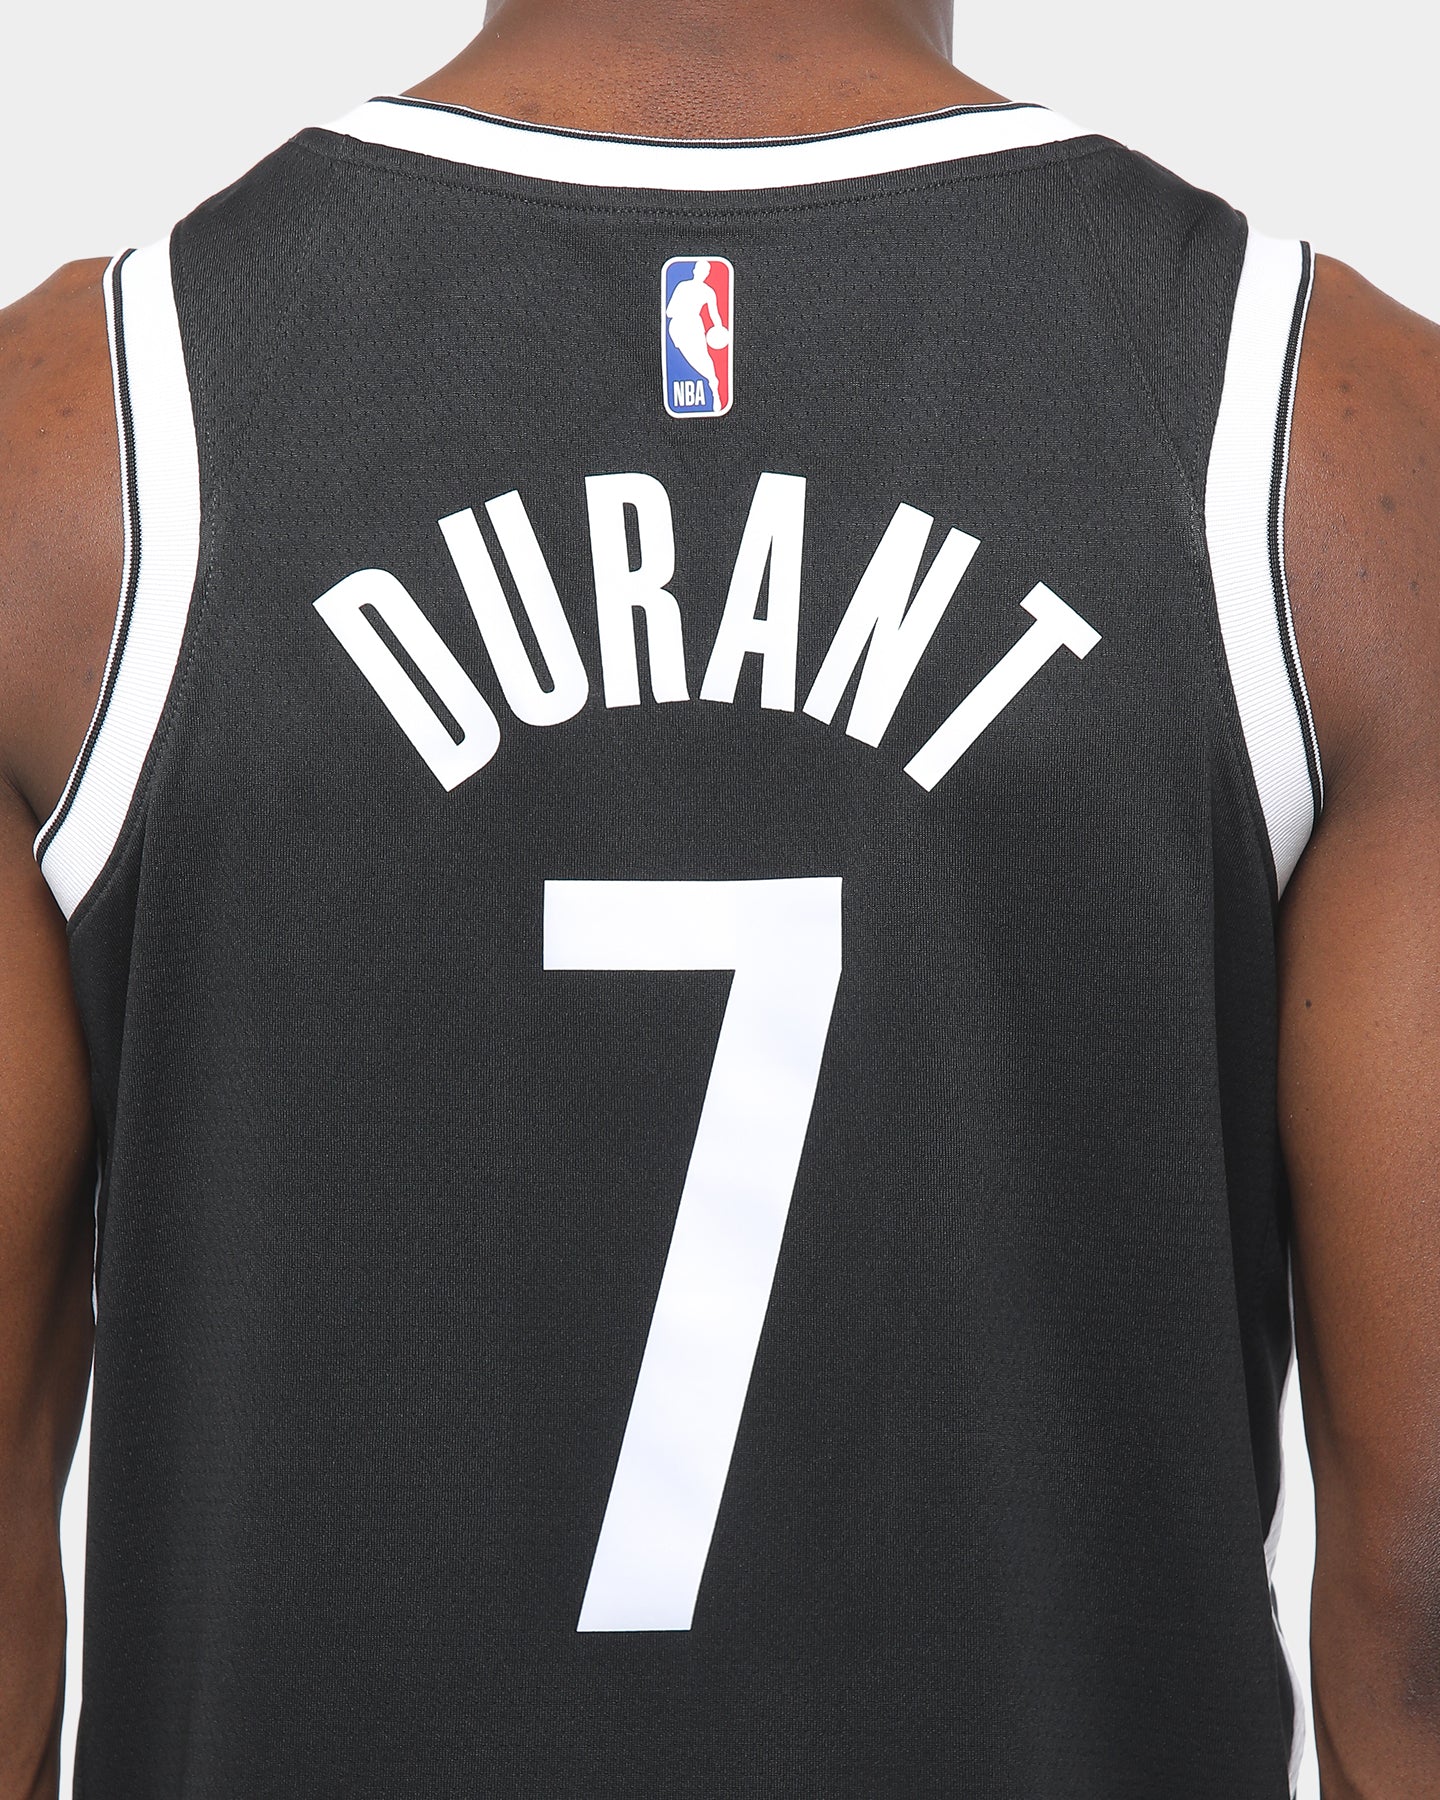 kevin durant number 7 jersey